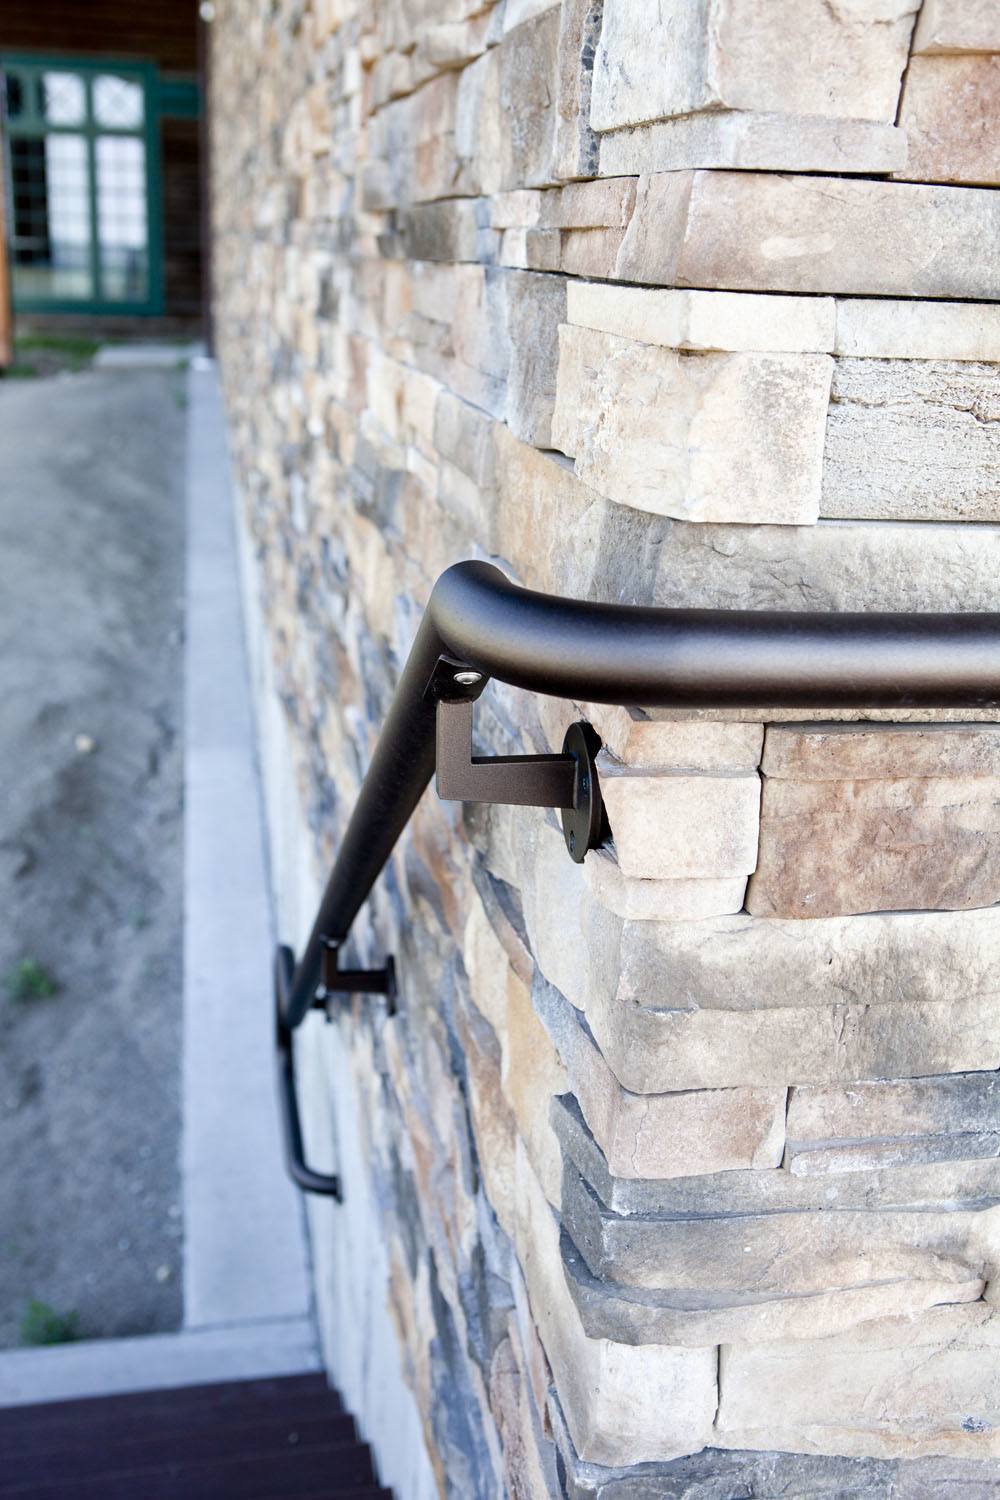 Metal handrail mounted on stone wall